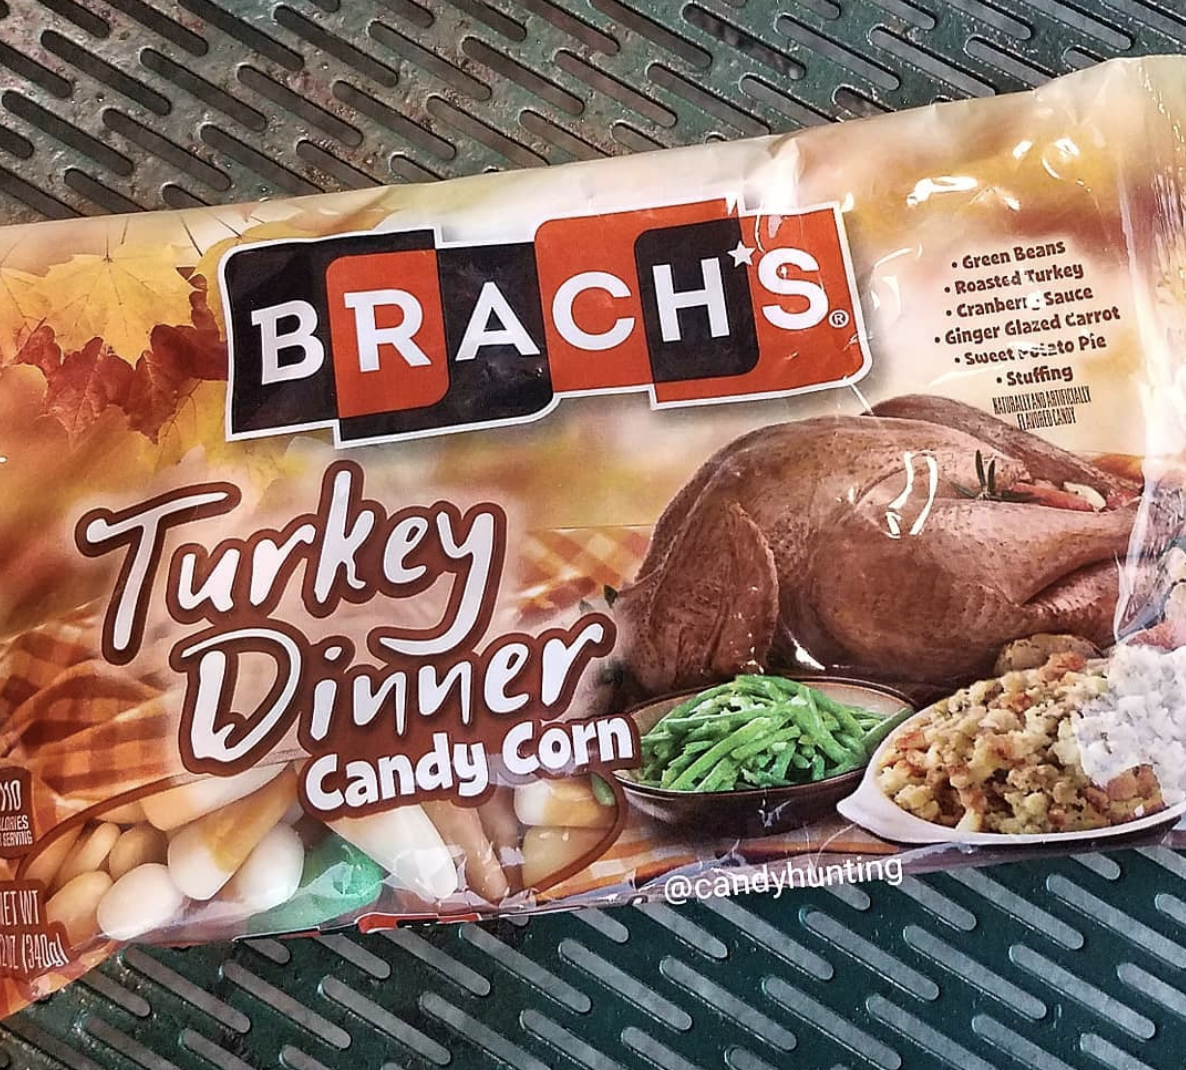 Do You Want to Try Brach's Candy Corn for Thanksgiving Dinner?